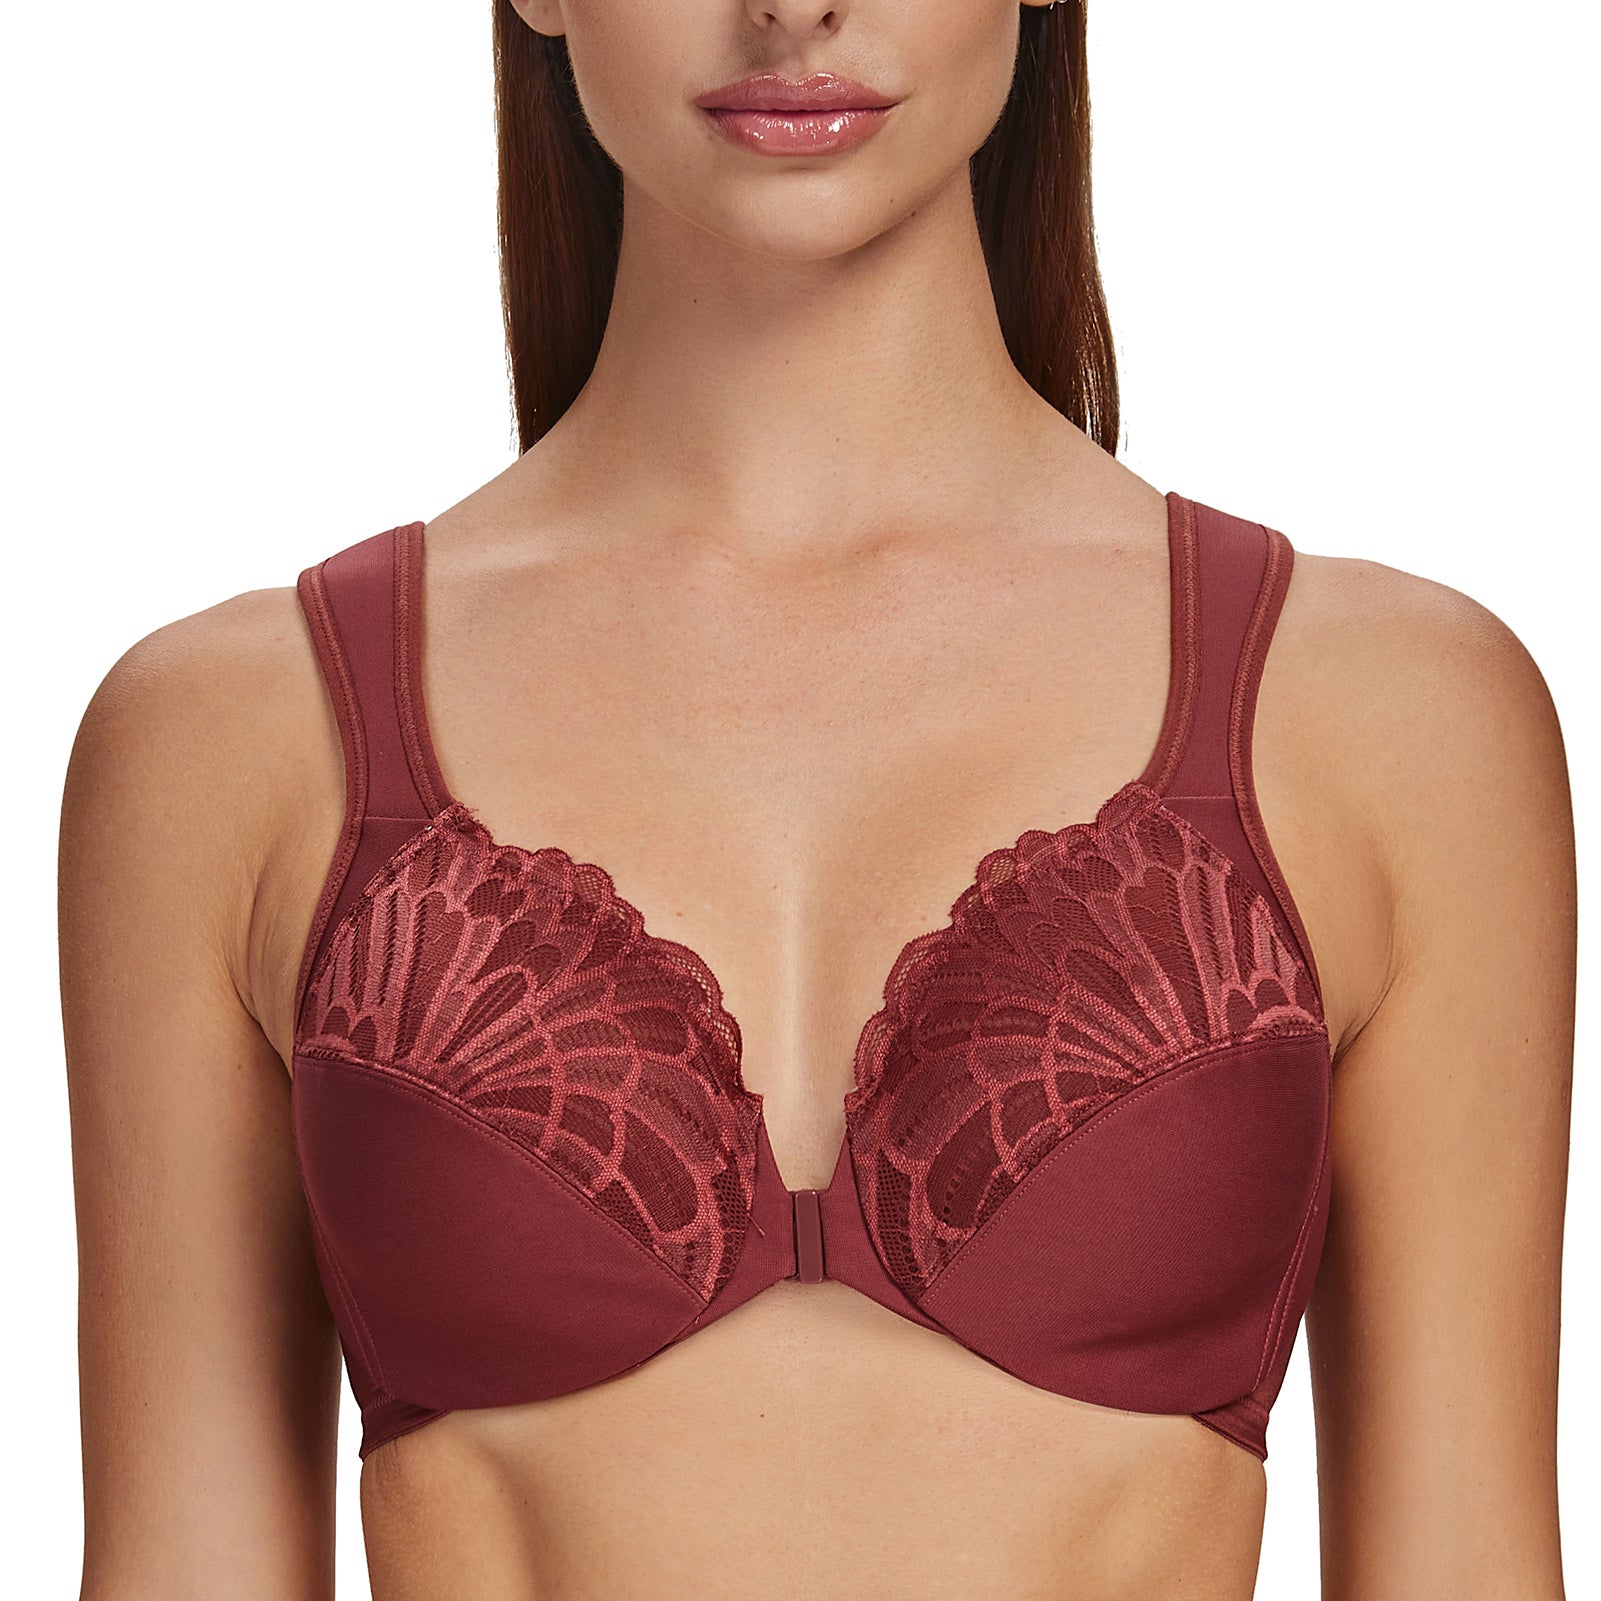 MELENECA Front Closure Underwire Unlined Lace Cup Bras